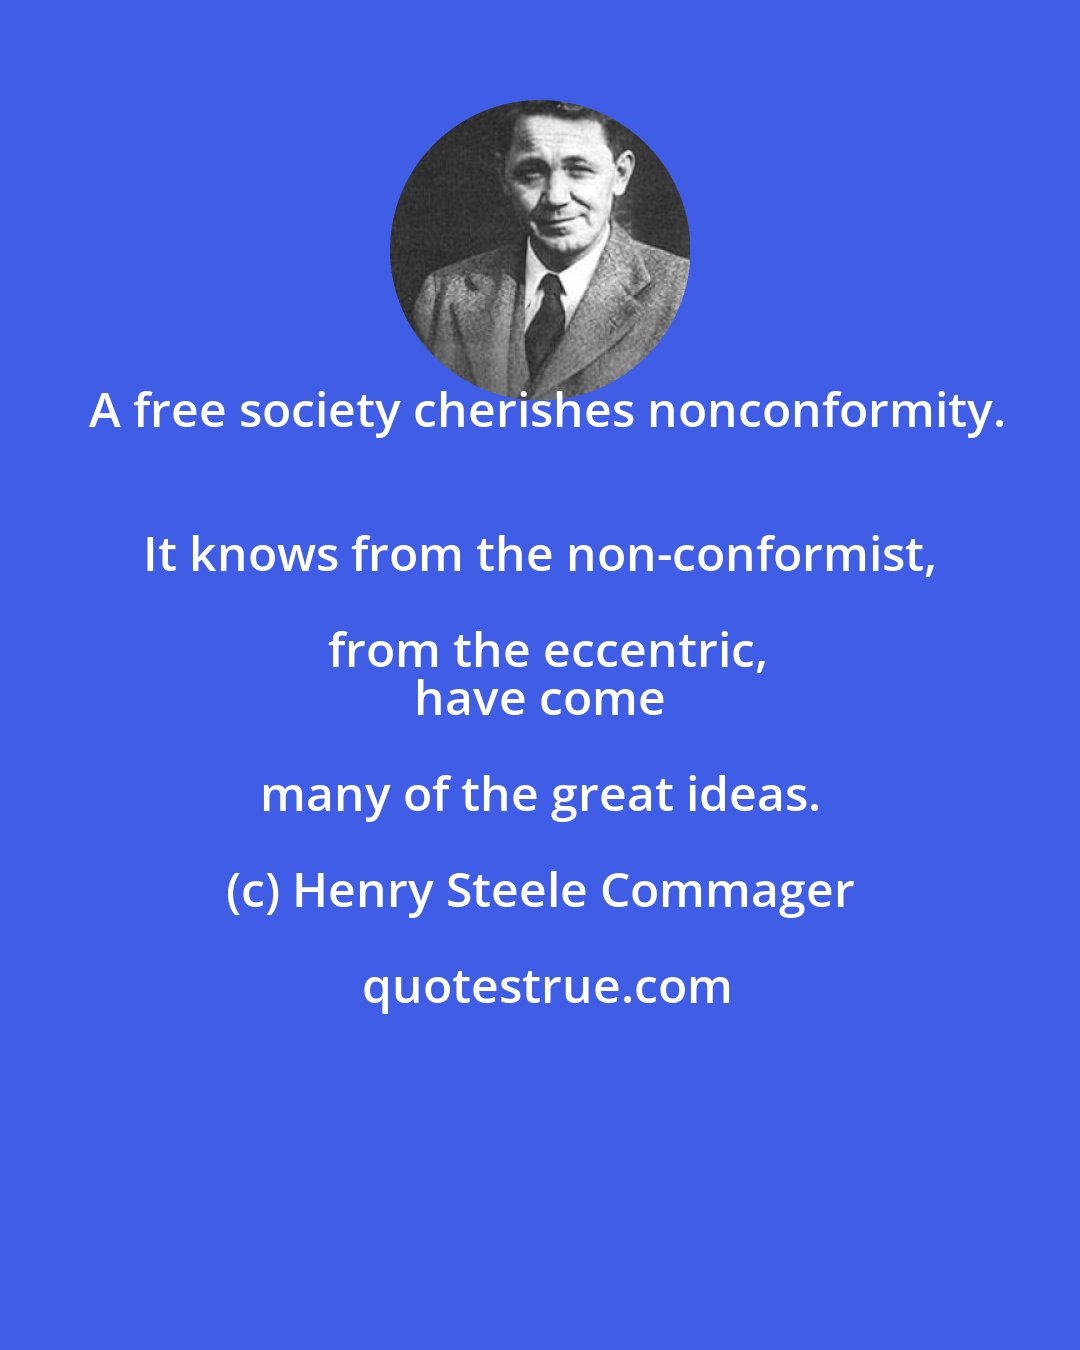 Henry Steele Commager: A free society cherishes nonconformity.
 It knows from the non-conformist, from the eccentric,
 have come many of the great ideas.